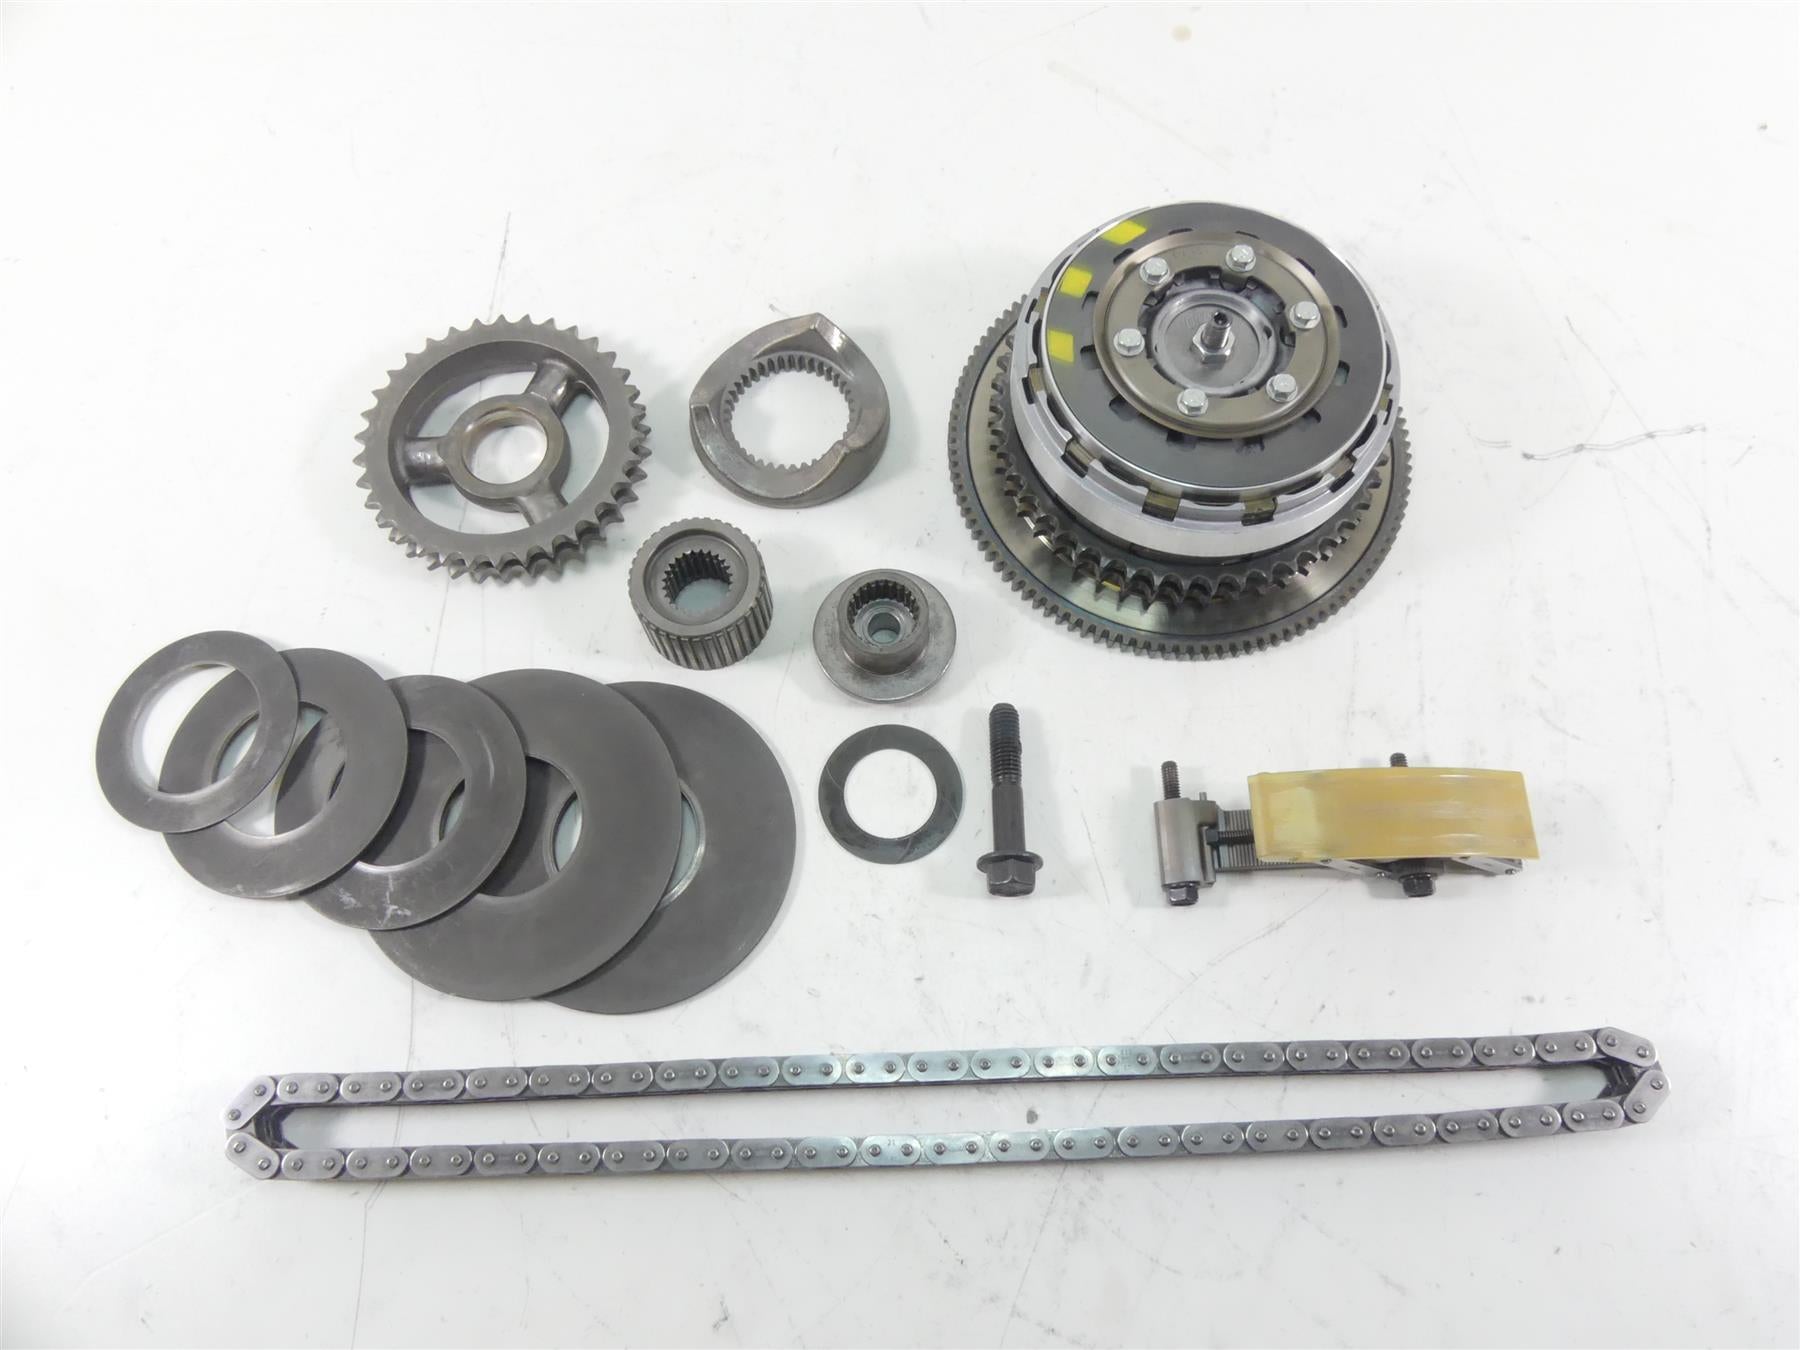 2013 Harley FXDWG Dyna Wide Glide Primary Drive Clutch Kit Set 37816-11 | Mototech271